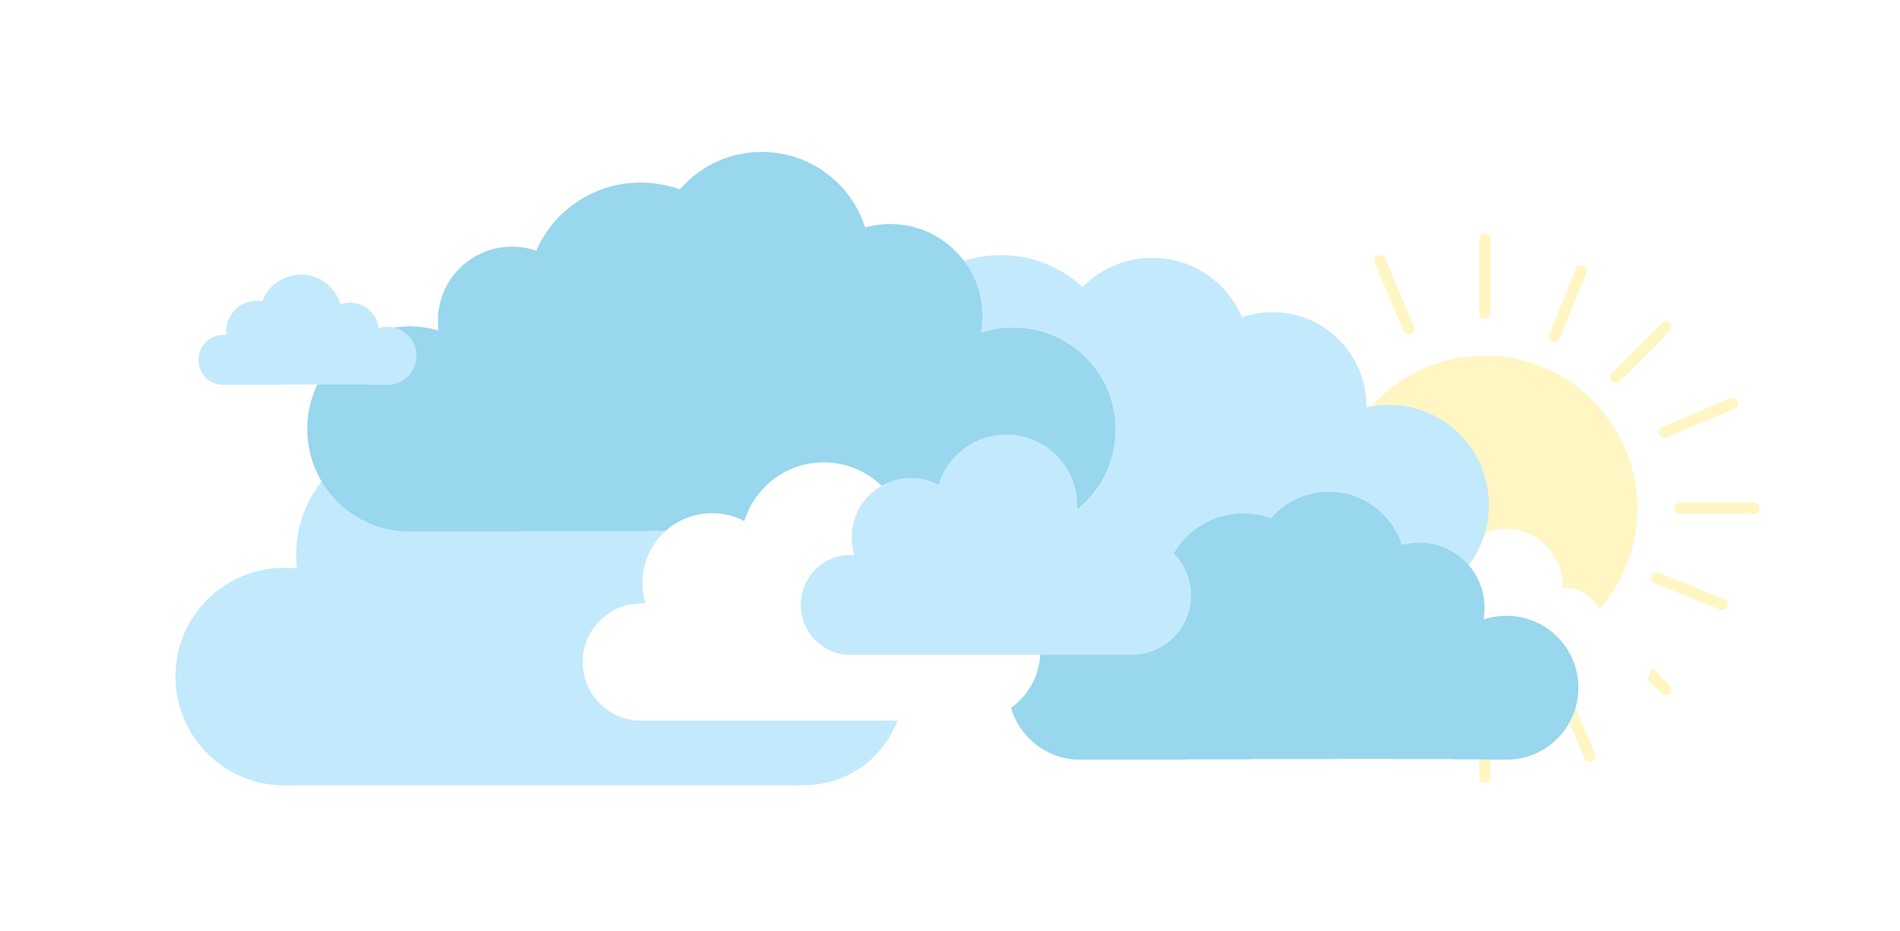 Counselling Cloud Illustration HEADER